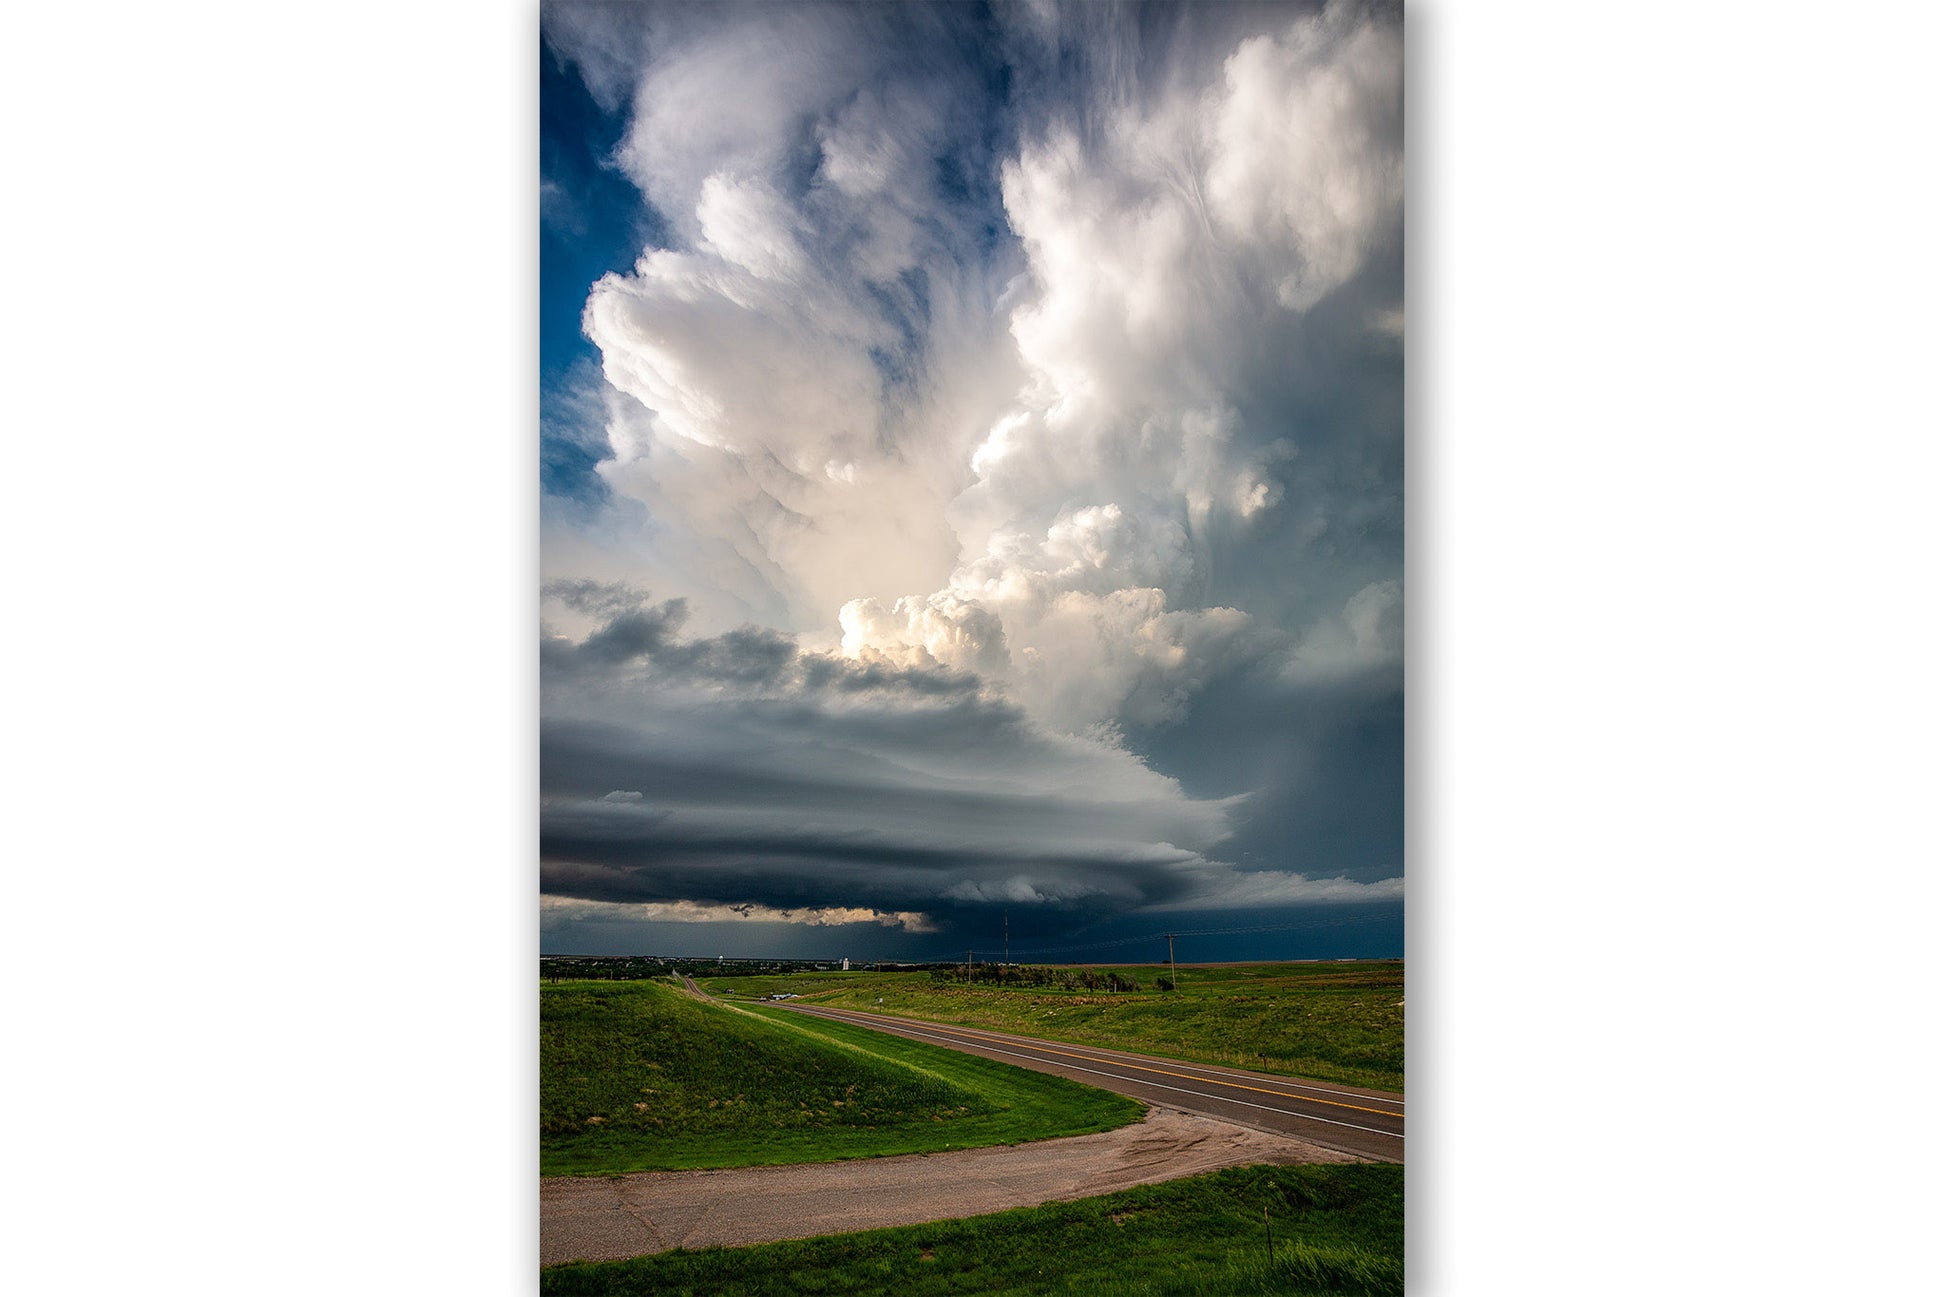 Vertical storm photography print of a supercell thunderstorm with a tall updraft over a highway on a stormy spring day in Kansas by Sean Ramsey of Southern Plains Photography.